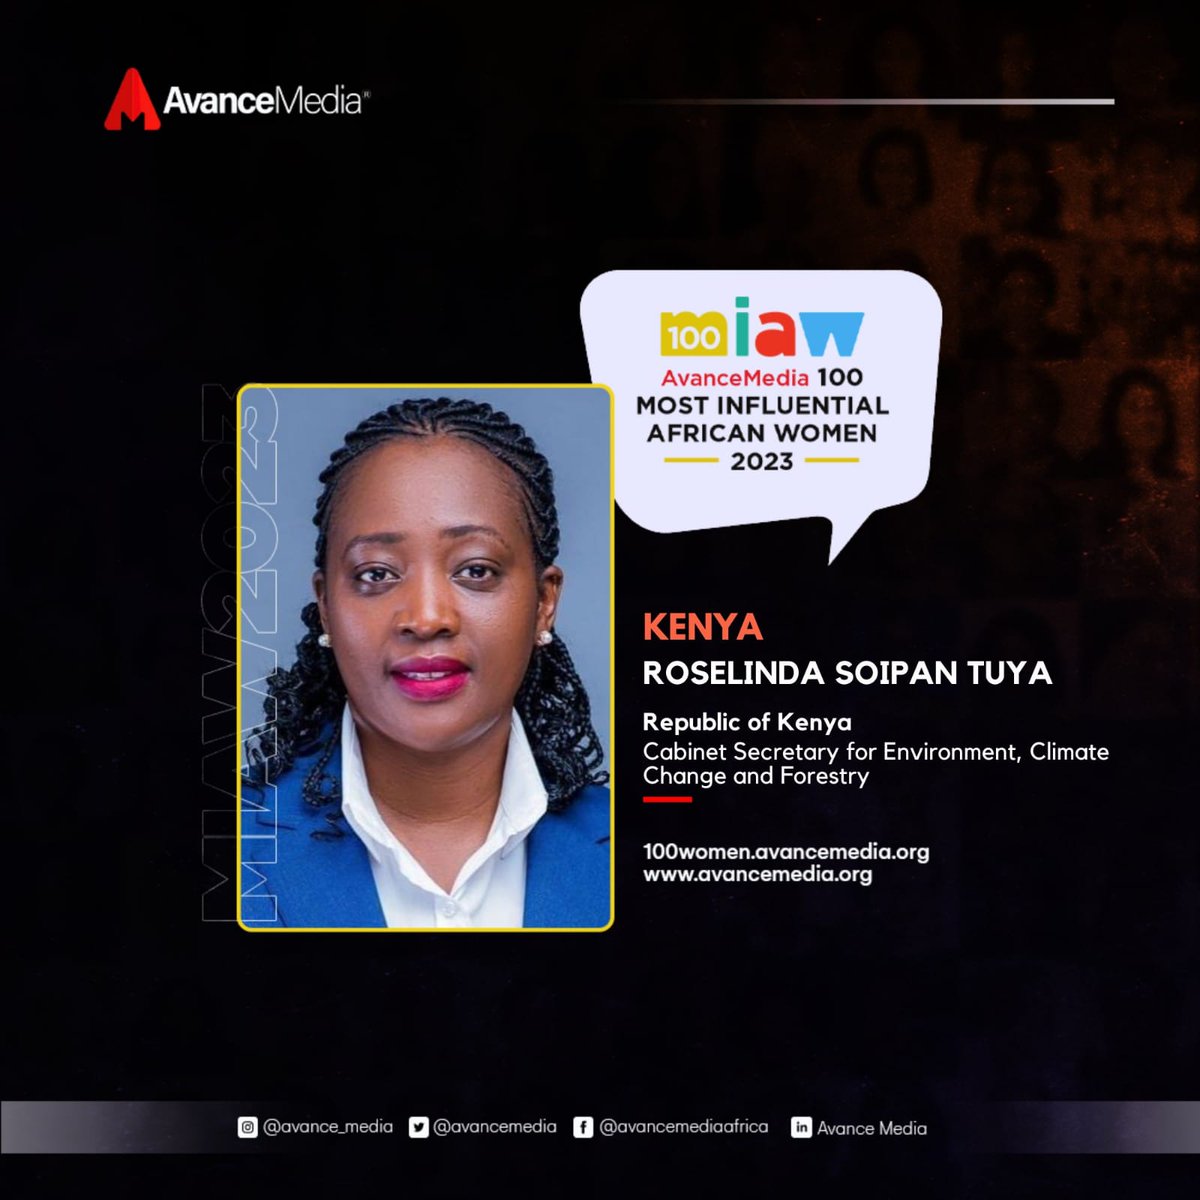 Hearty congratulations to our Cabinet Secretary Hon. Soipan Tuya on her enlistment among 100 Most Influential African Women in 2023 by Avance Media for her leading role in advancing Africa's climate action agenda. #WomenLeaders #AvanceMedia